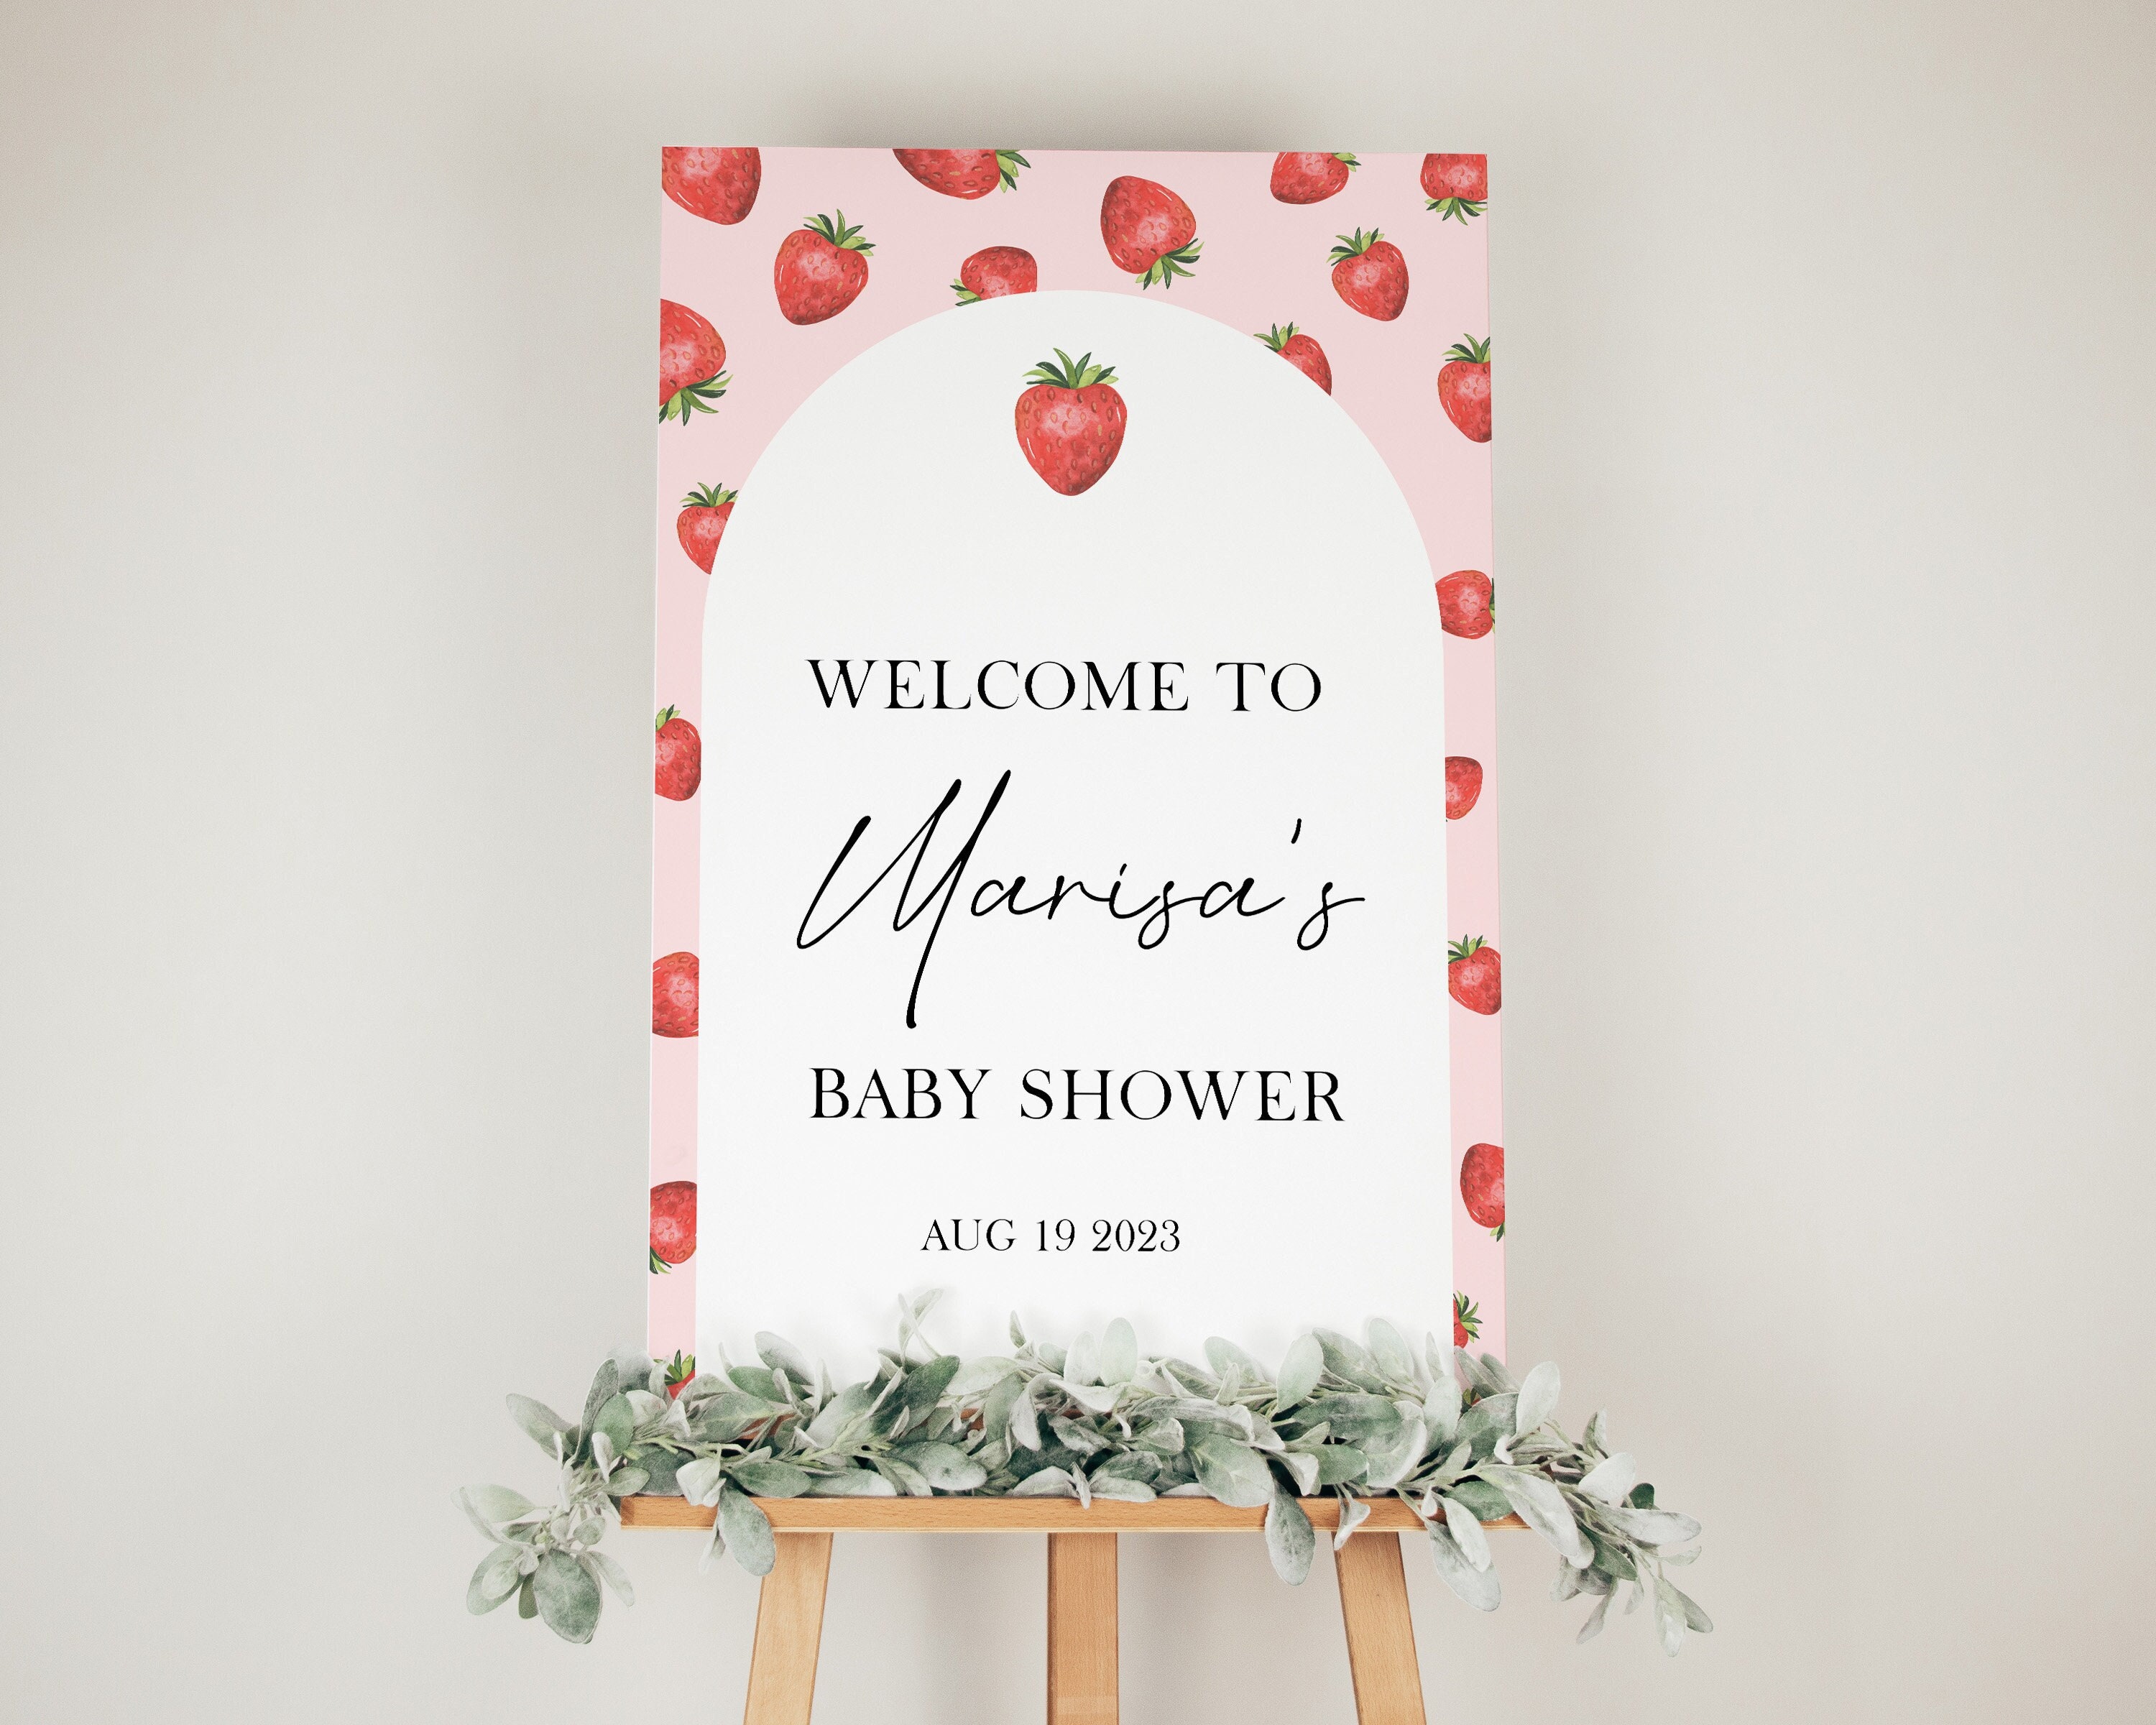 A Berry Sweet Baby is on the Way Baby Shower Sign